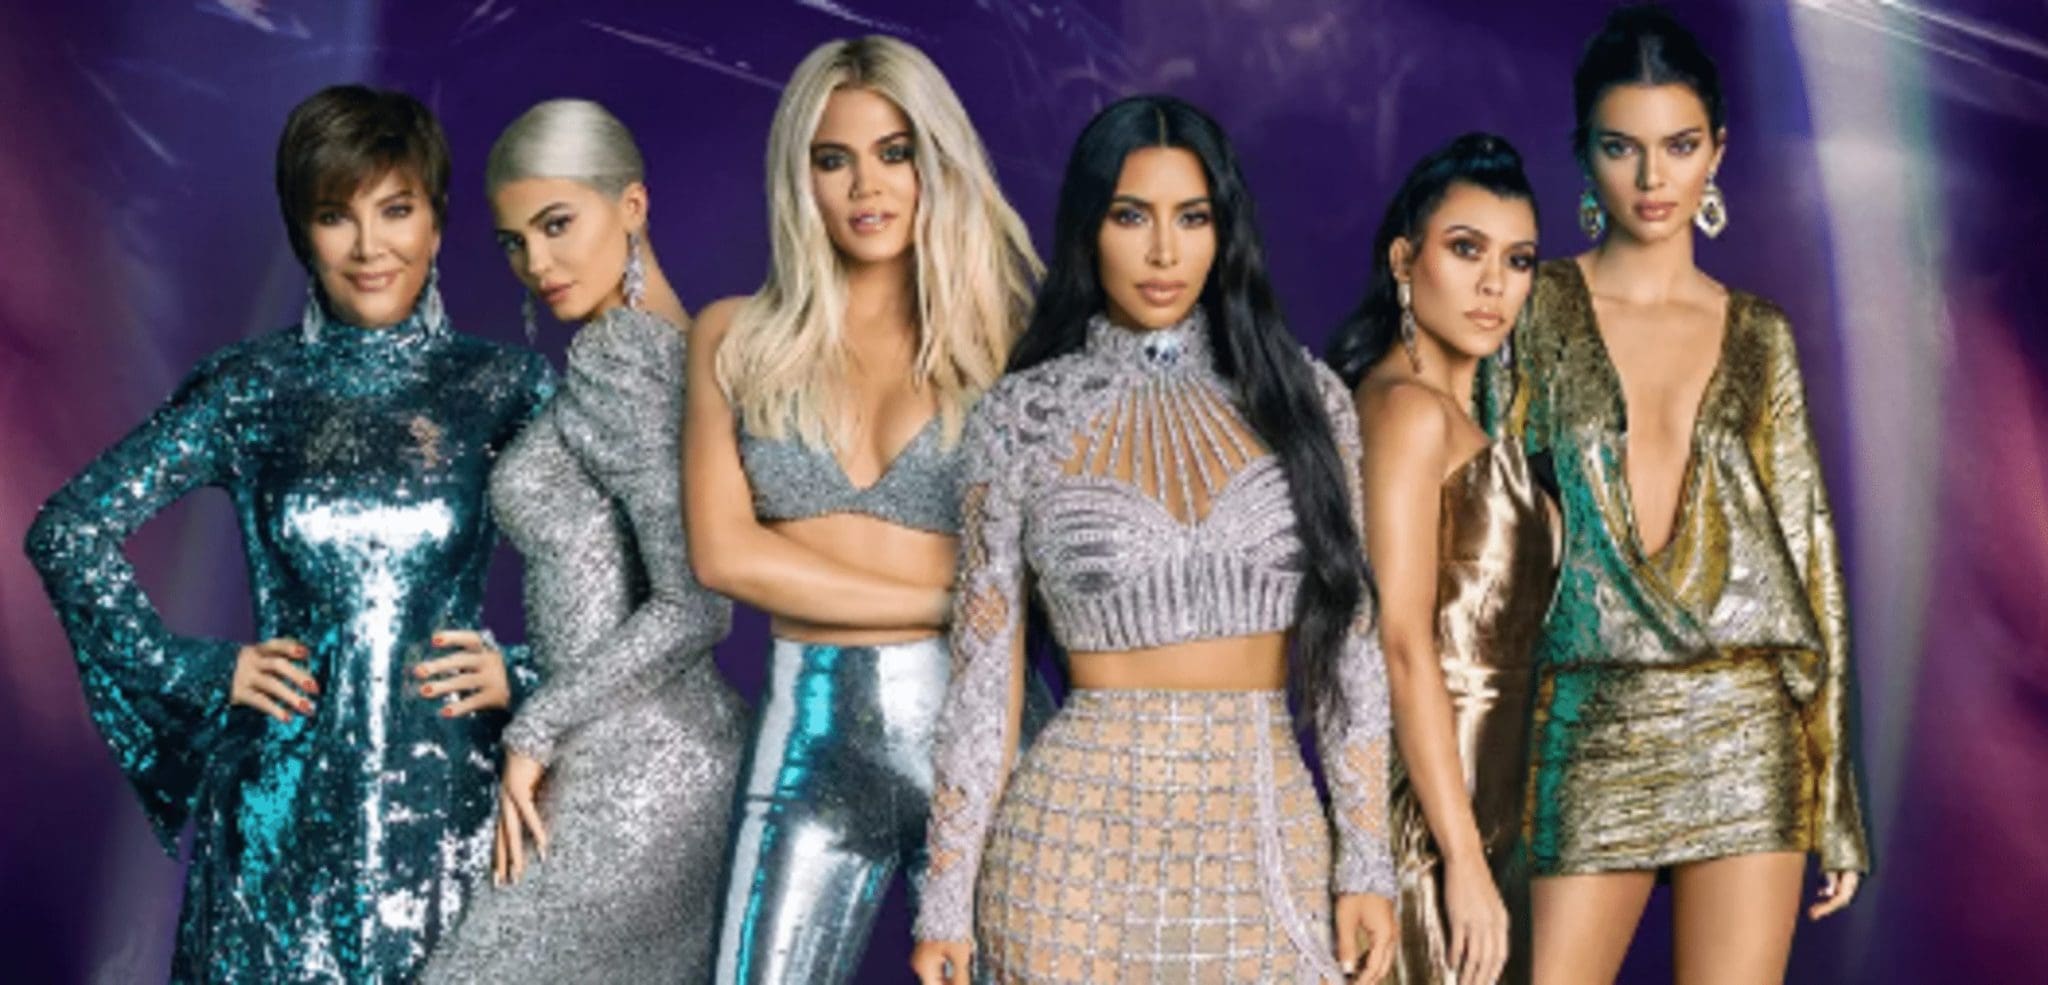 The Second Season Of Hulu's The Kardashians Teases What The Kardashian-Jenner Family May Expect Both Socially And Professionally